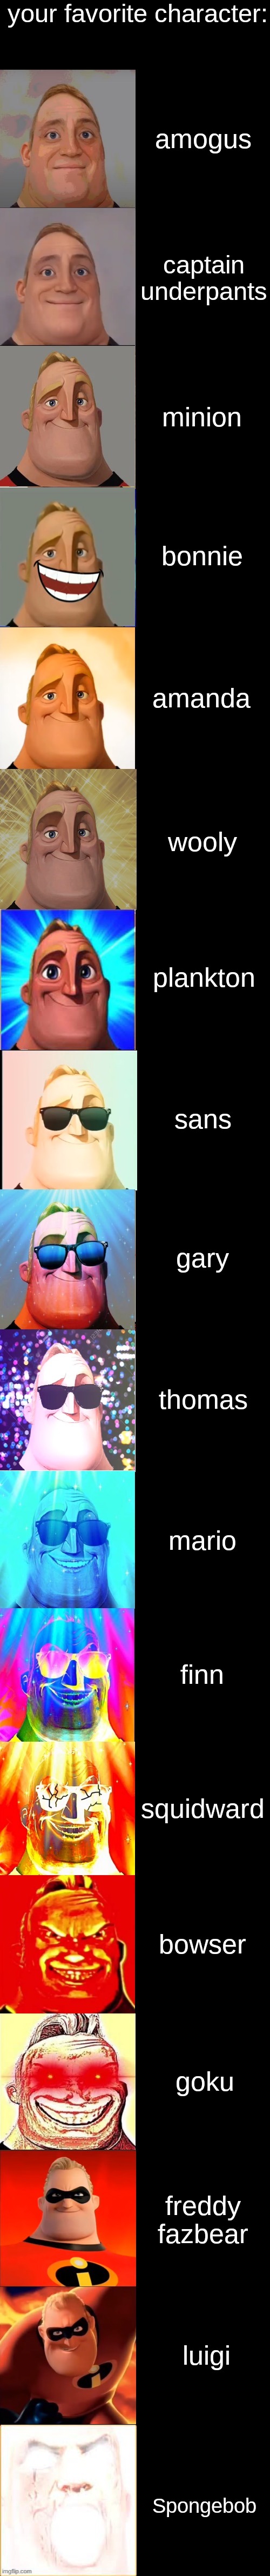 your favorite character be like | your favorite character:; amogus; captain underpants; minion; bonnie; amanda; wooly; plankton; sans; gary; thomas; mario; finn; squidward; bowser; goku; freddy fazbear; luigi; Spongebob | image tagged in mr incredible becoming canny extended | made w/ Imgflip meme maker